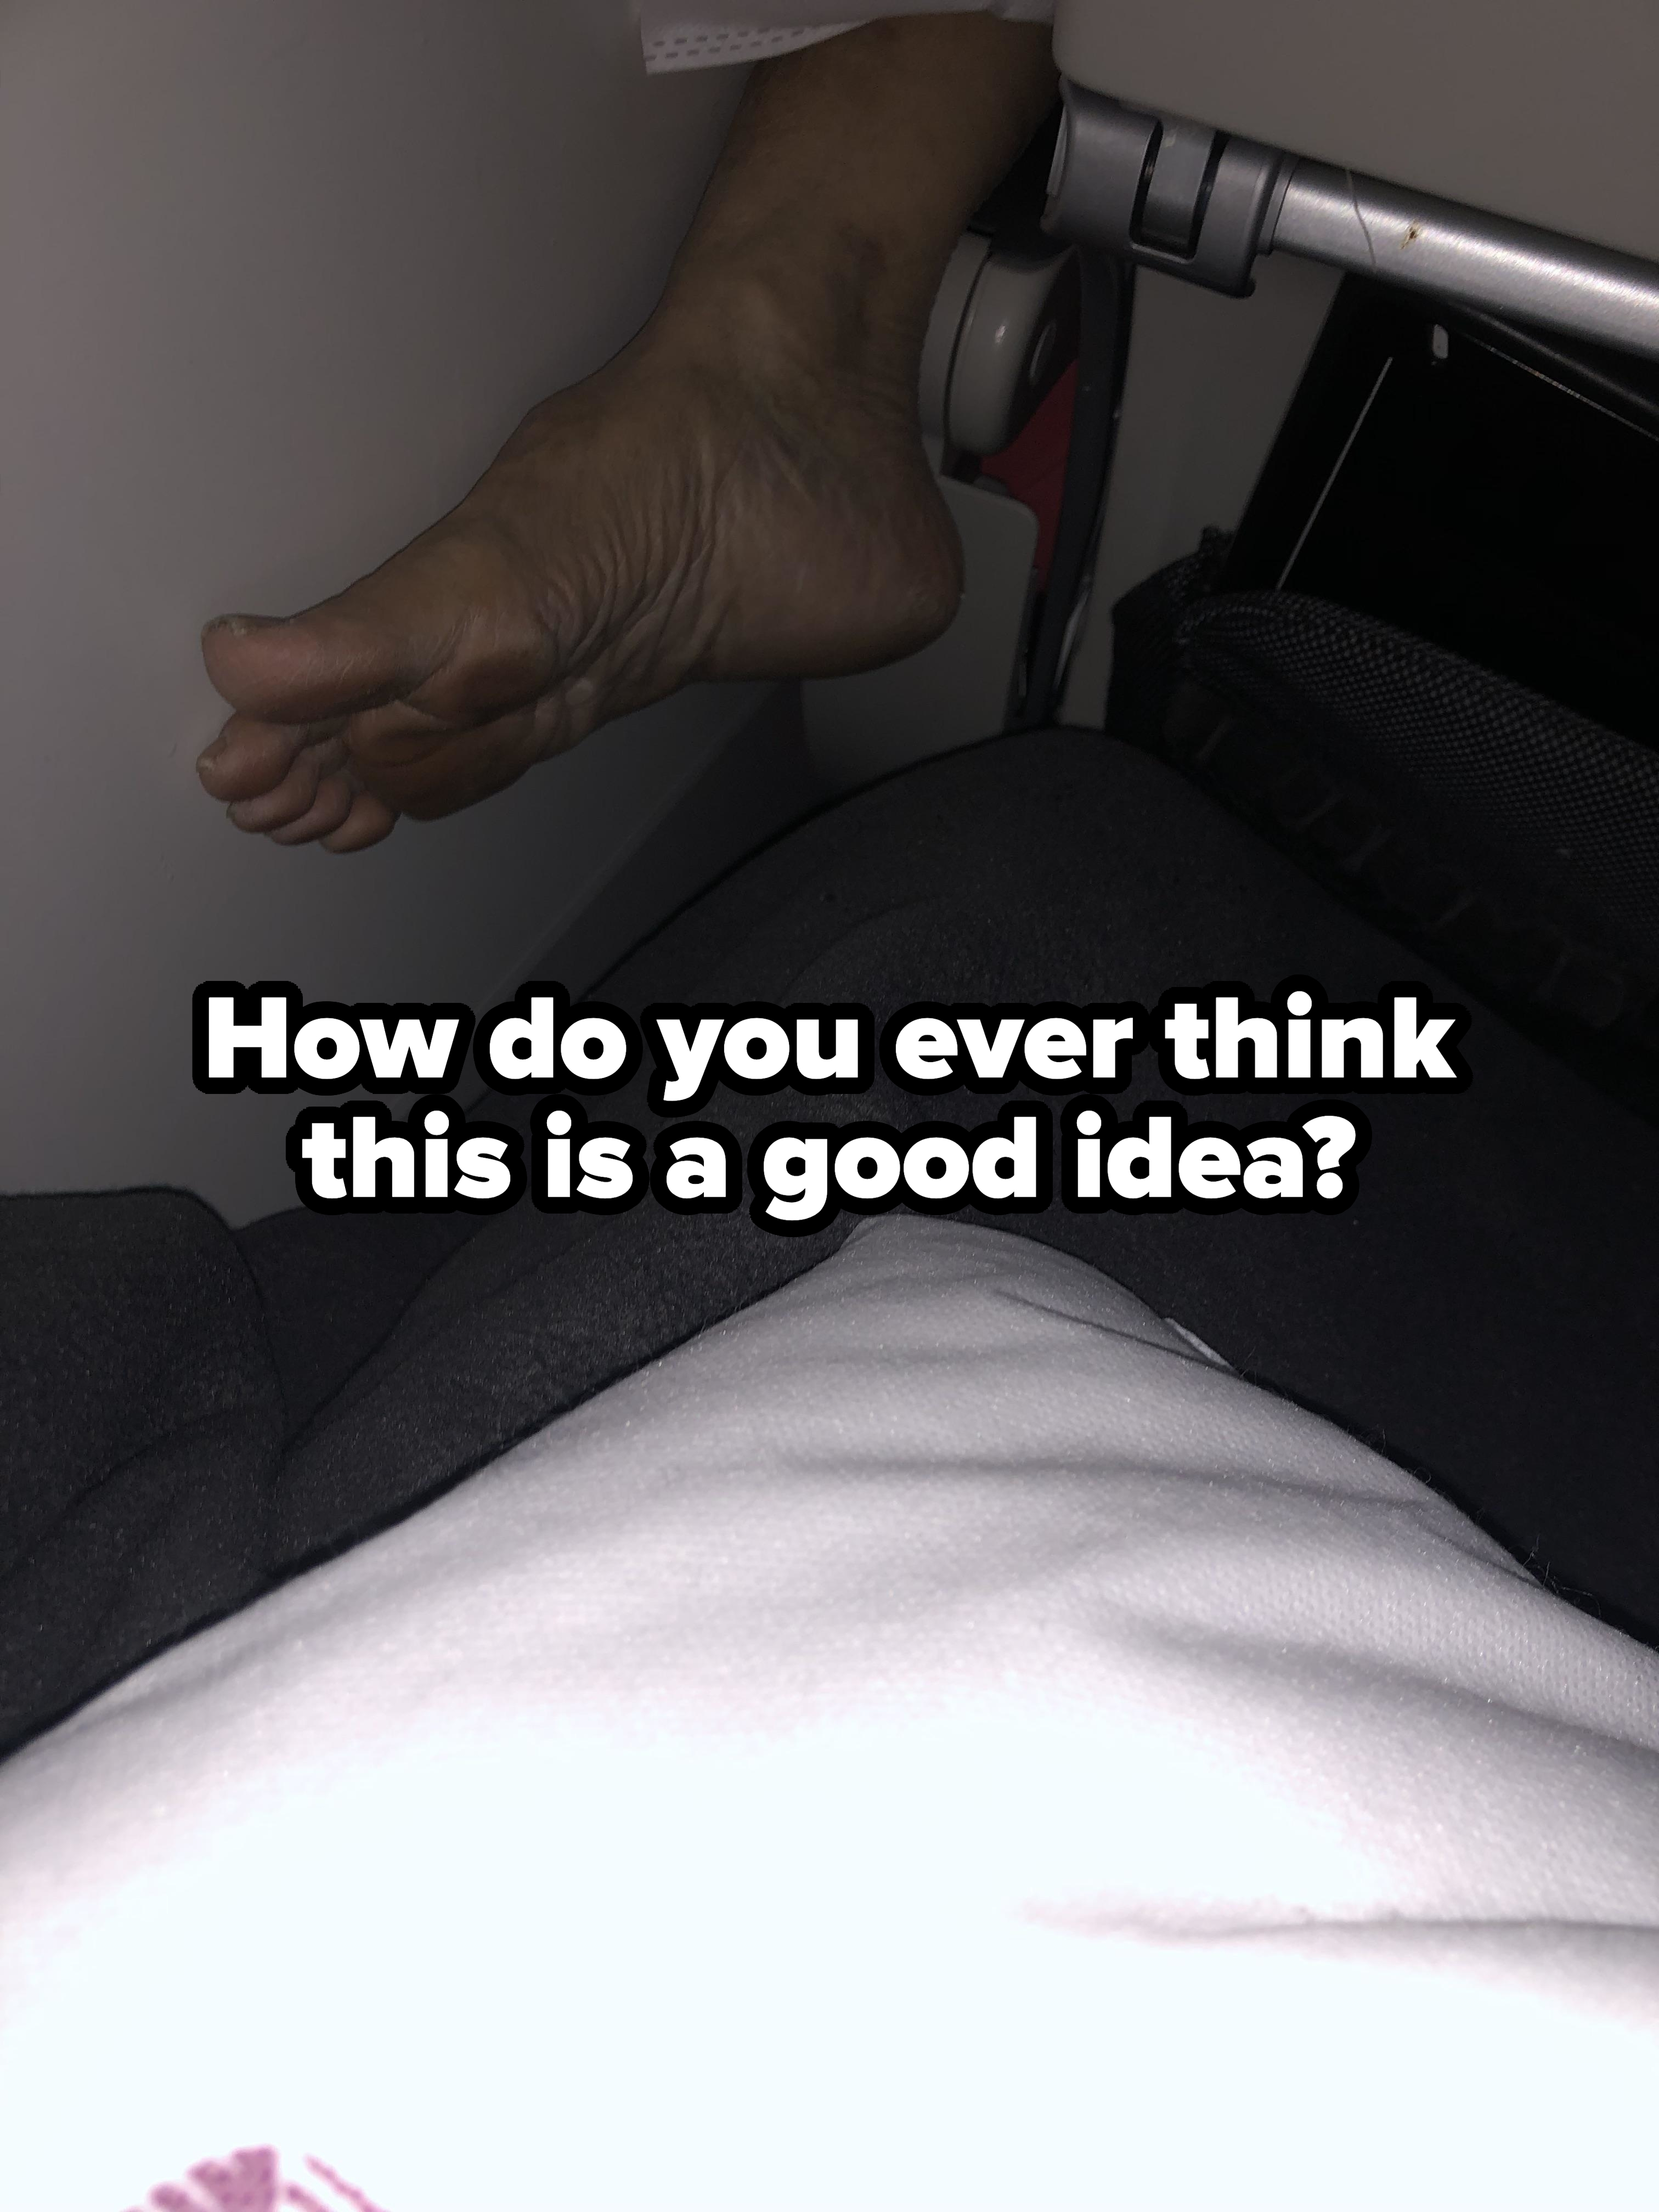 &quot;How do you ever think this is a good idea?&quot; showing someone&#x27;s bare feet sticking through the side of the seat